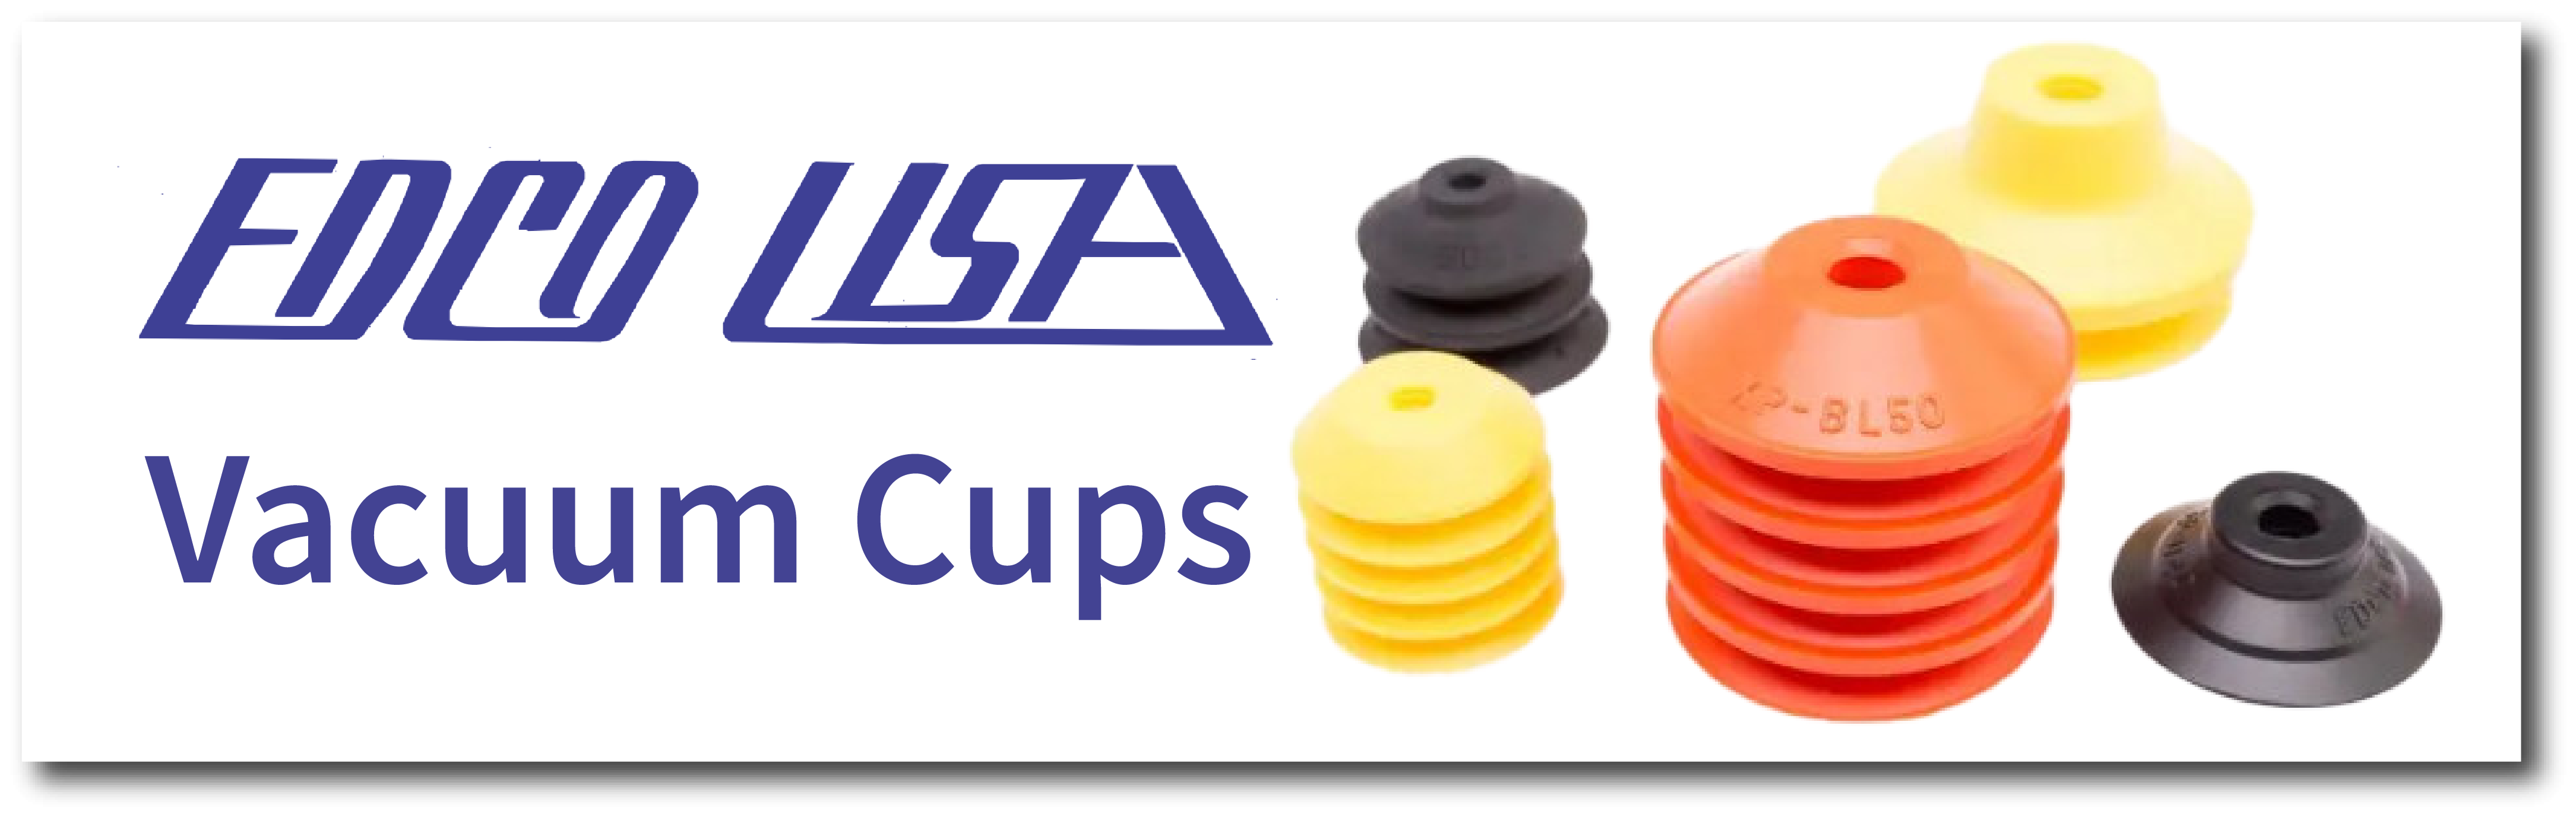 Edco USA Vacuum Cups Available from Scott Equipment Company